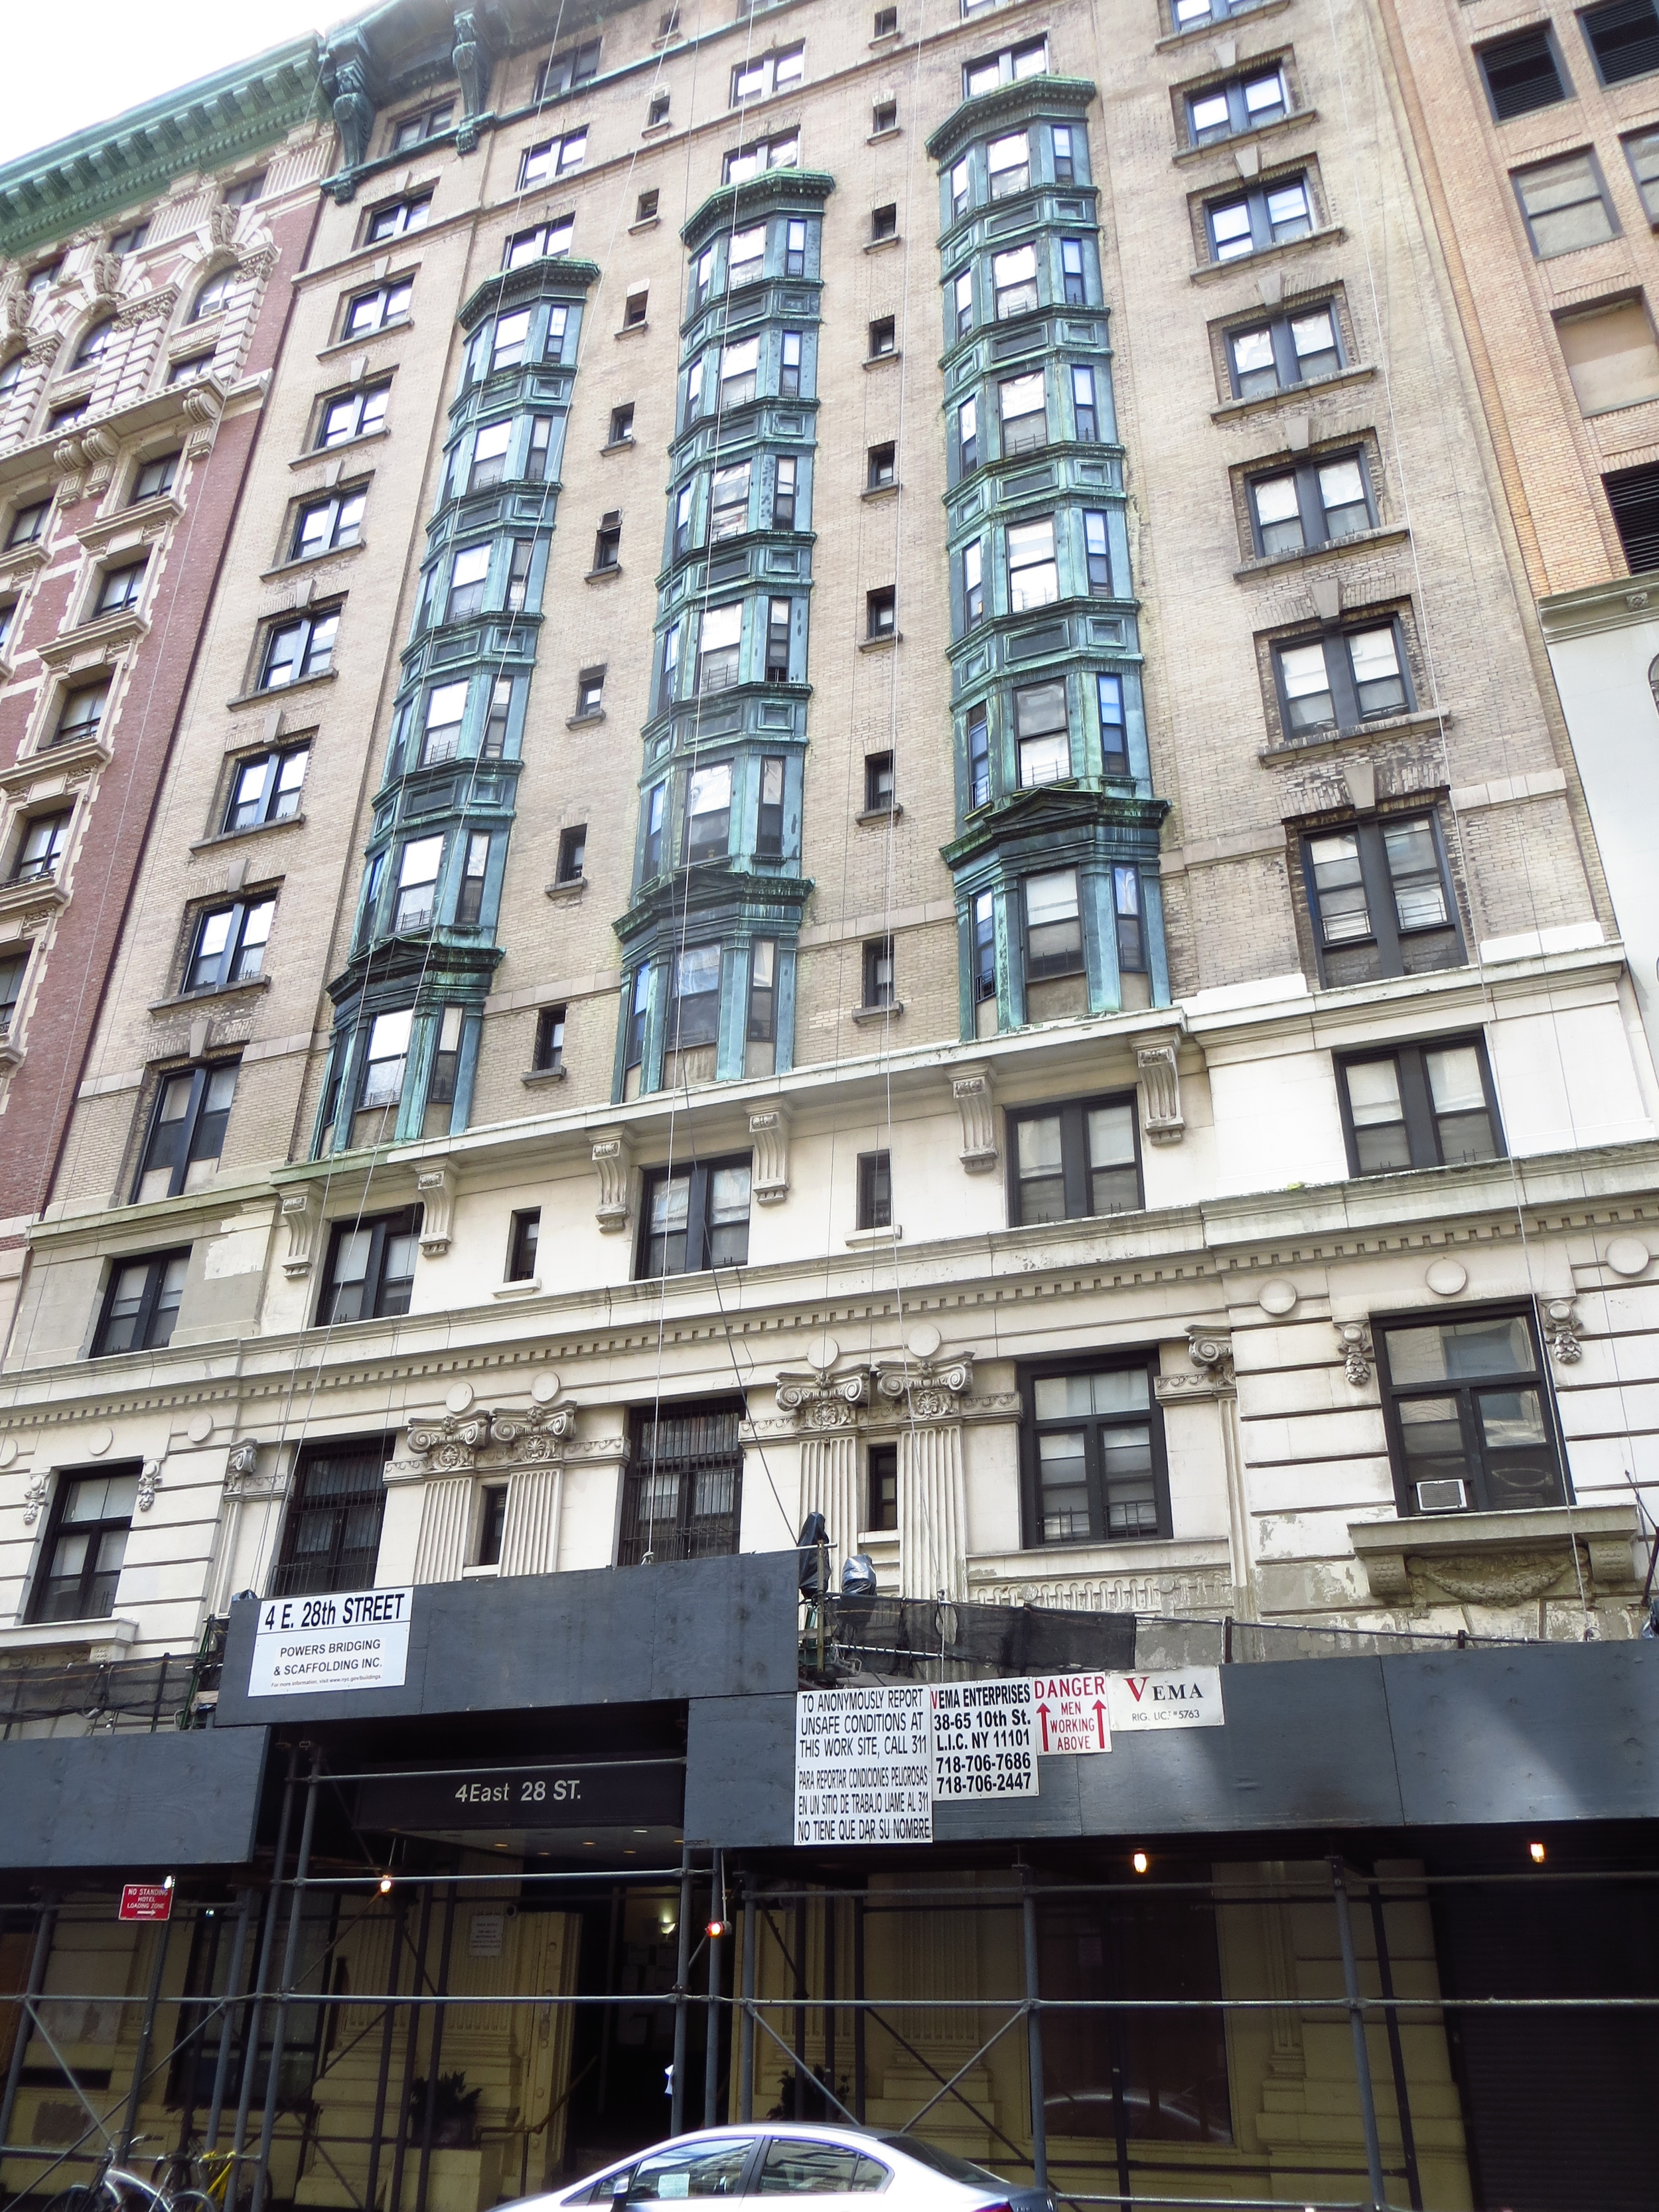 Cheapest(?) hotel in town: Where my NY adventure began